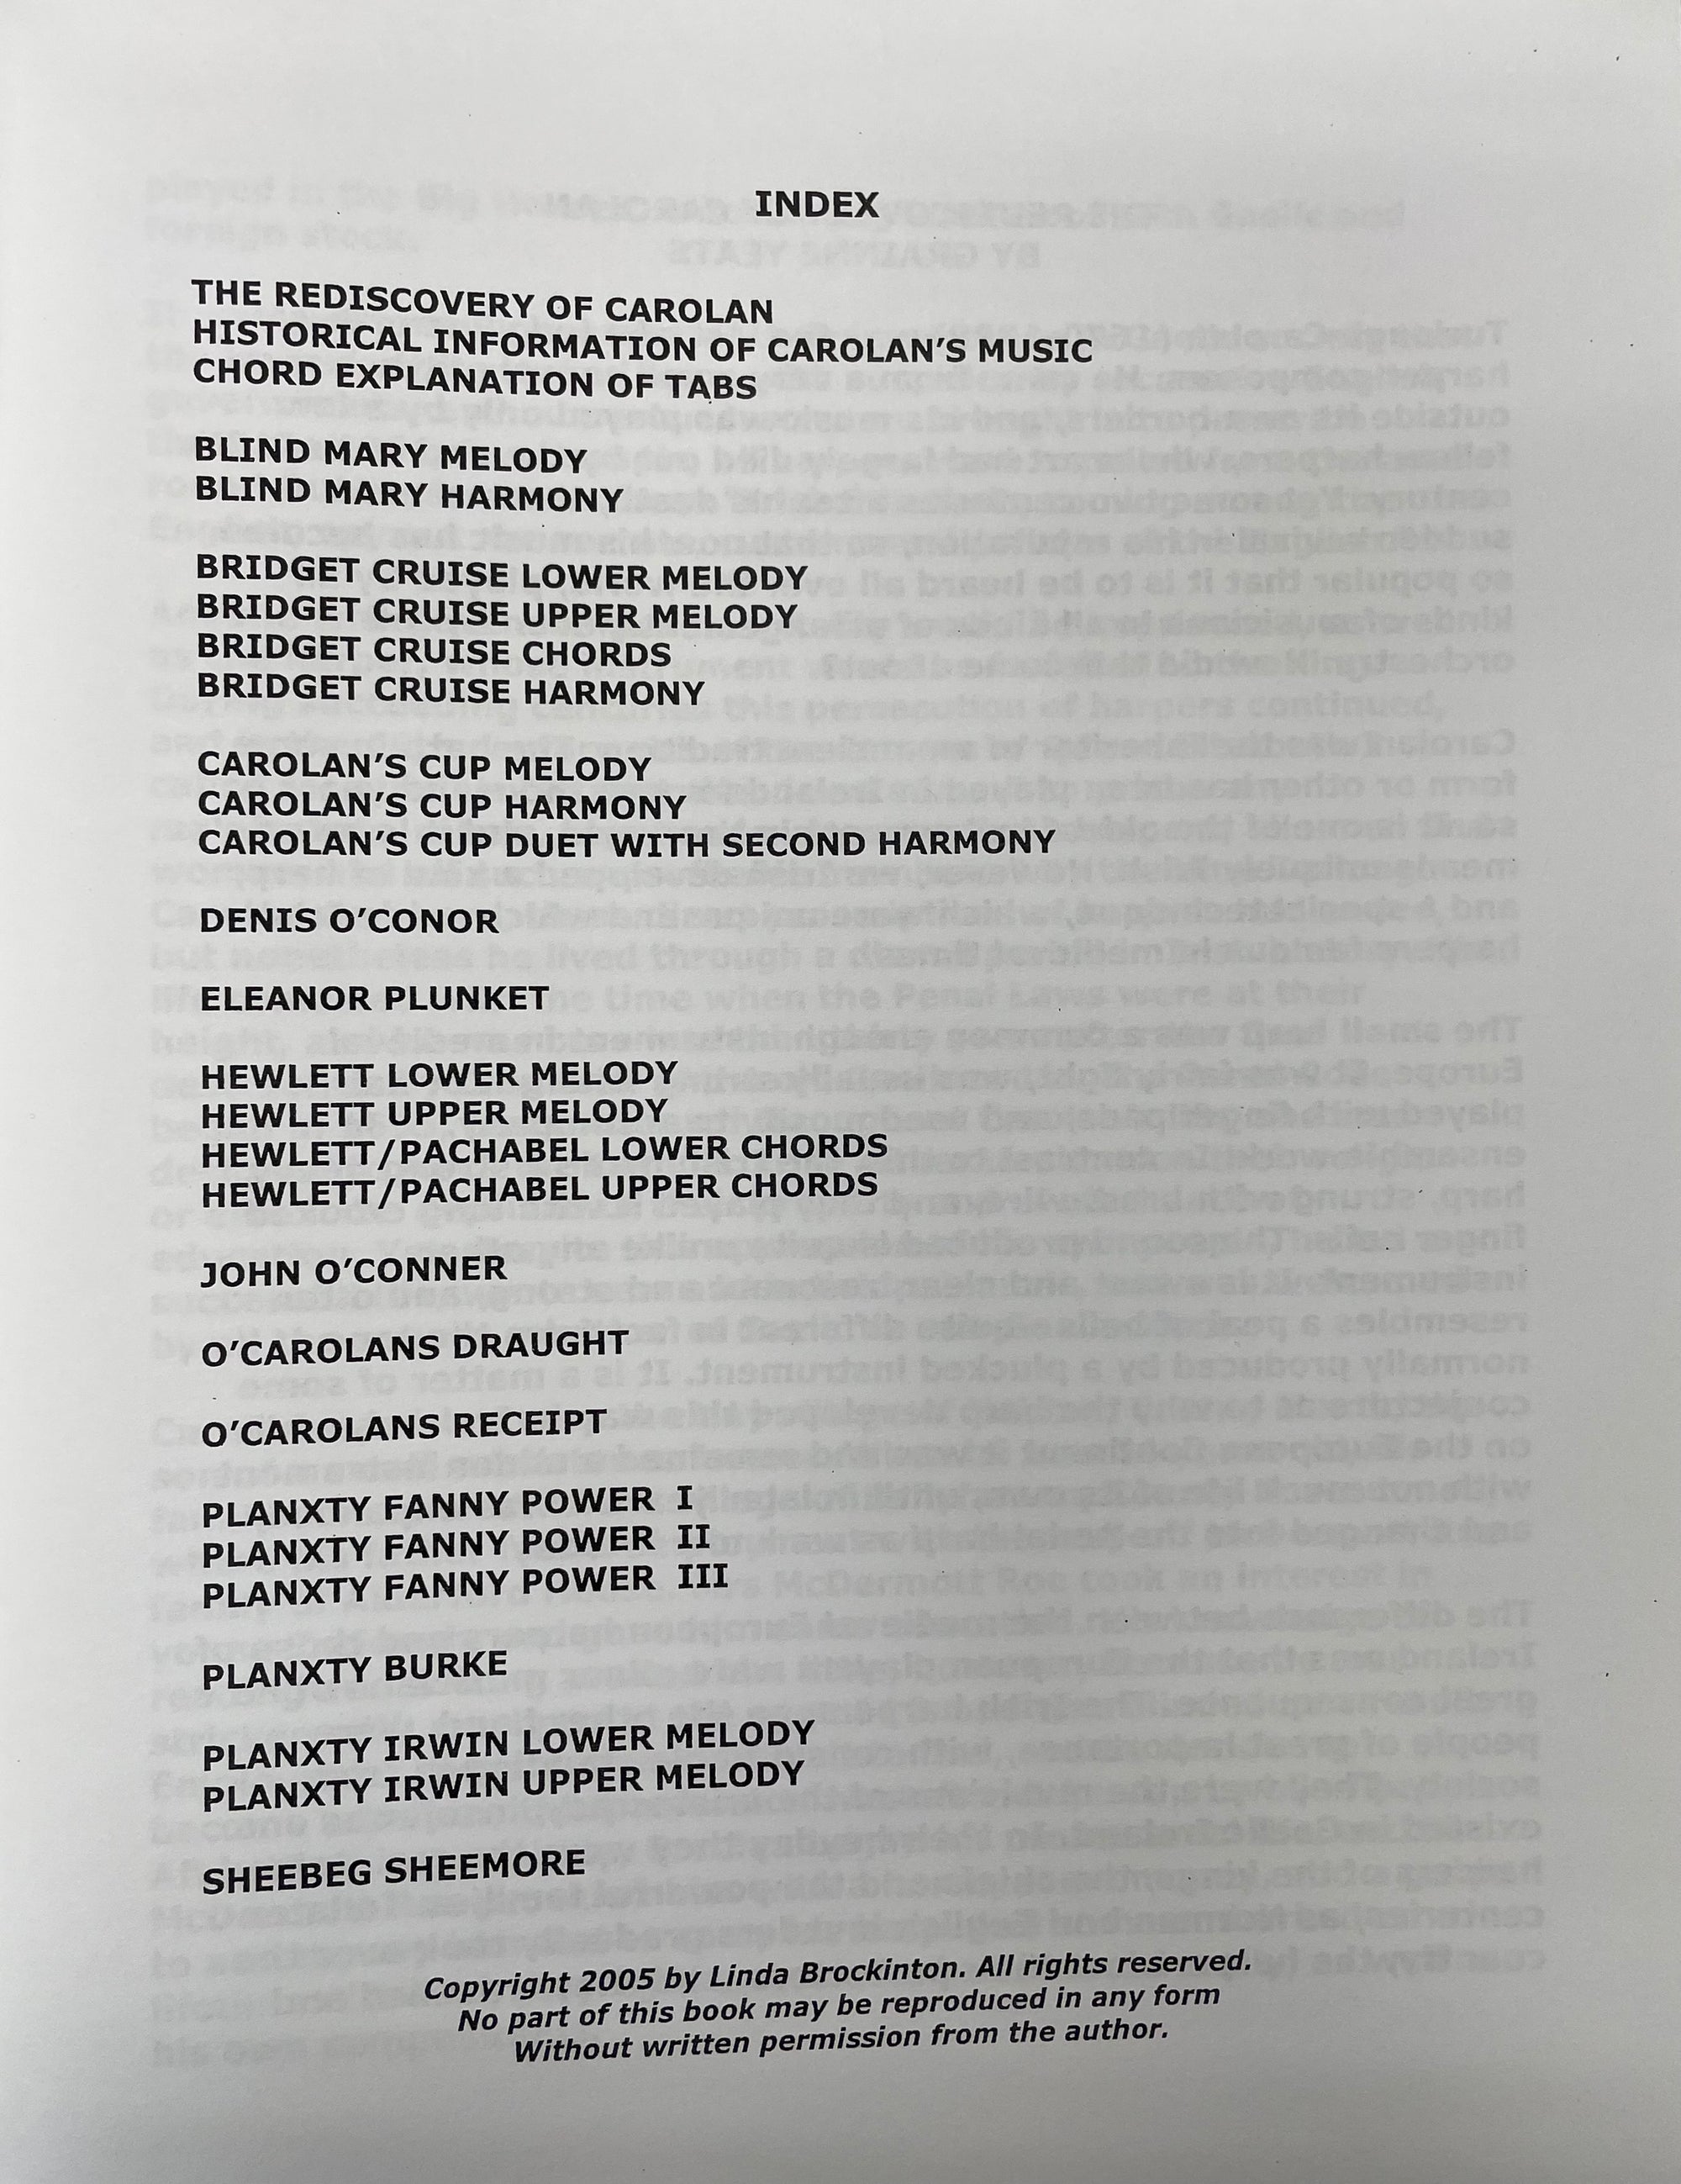 Image of a printed index page listing various musical compositions like "the rediscovery of Carolan's music" and "Blind Mary melody," among other titles in Carolan - Traditional Irish Harp Tunes for the Mountain Dulcimer by Linda Brockinton.